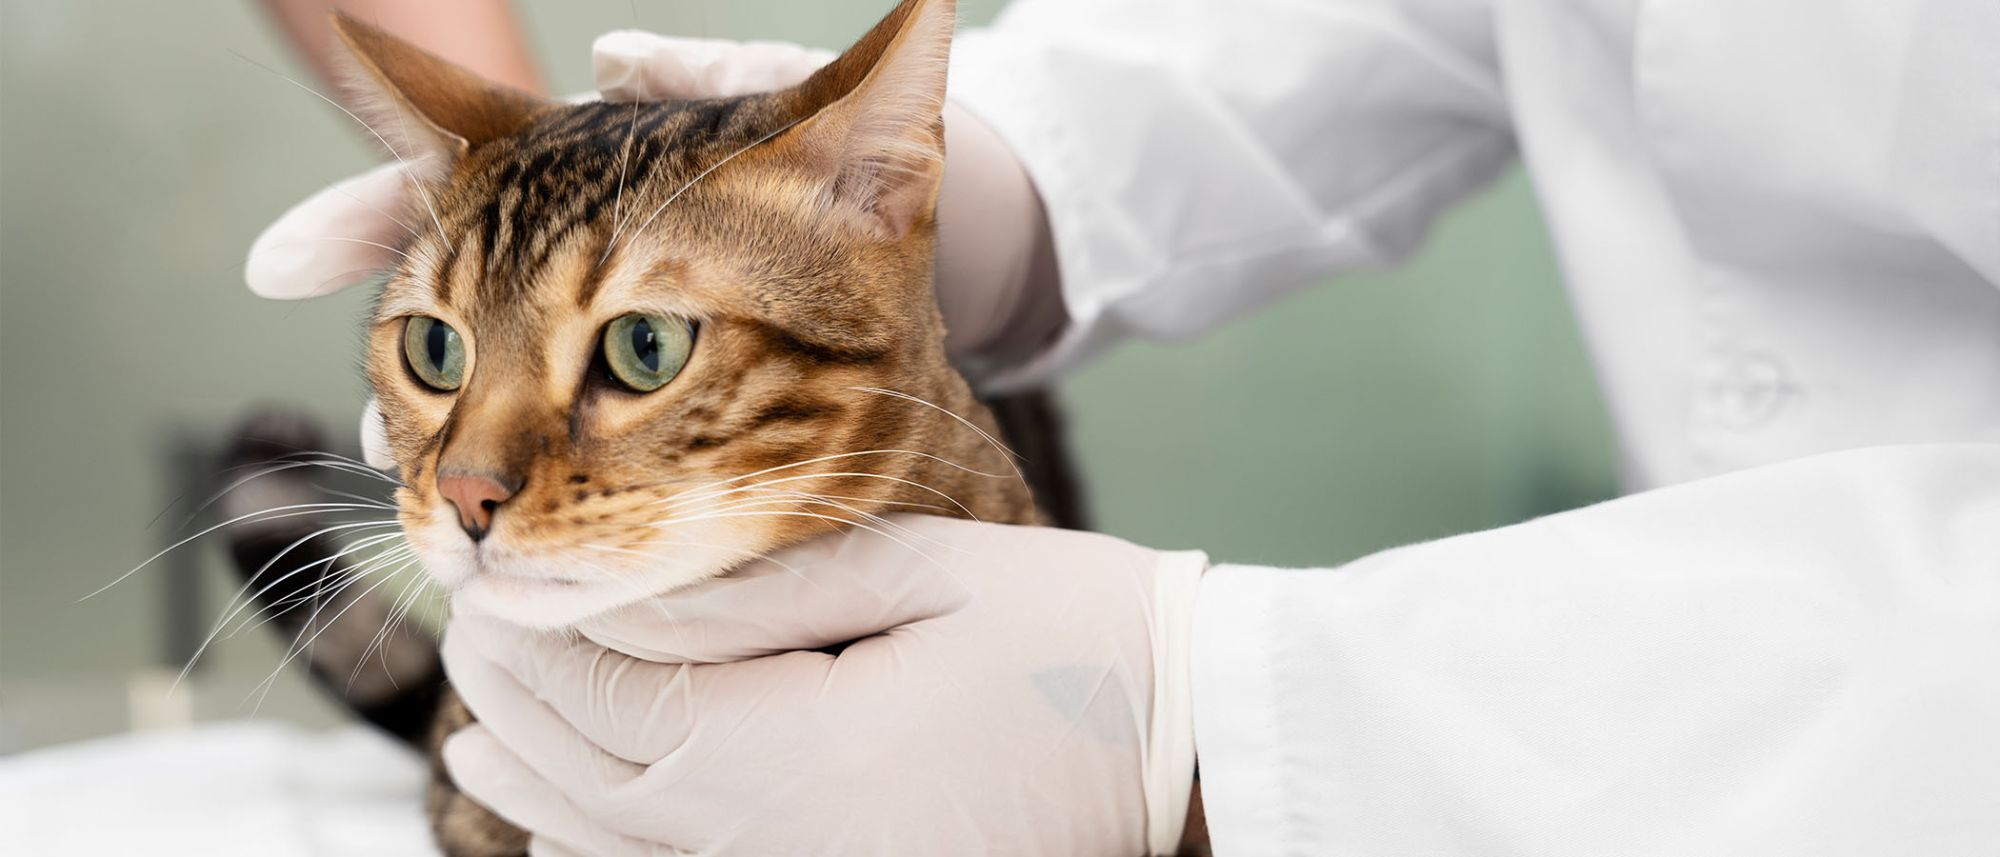 Study reveals that veterinary attention is not sought for over 50% of cat health issues